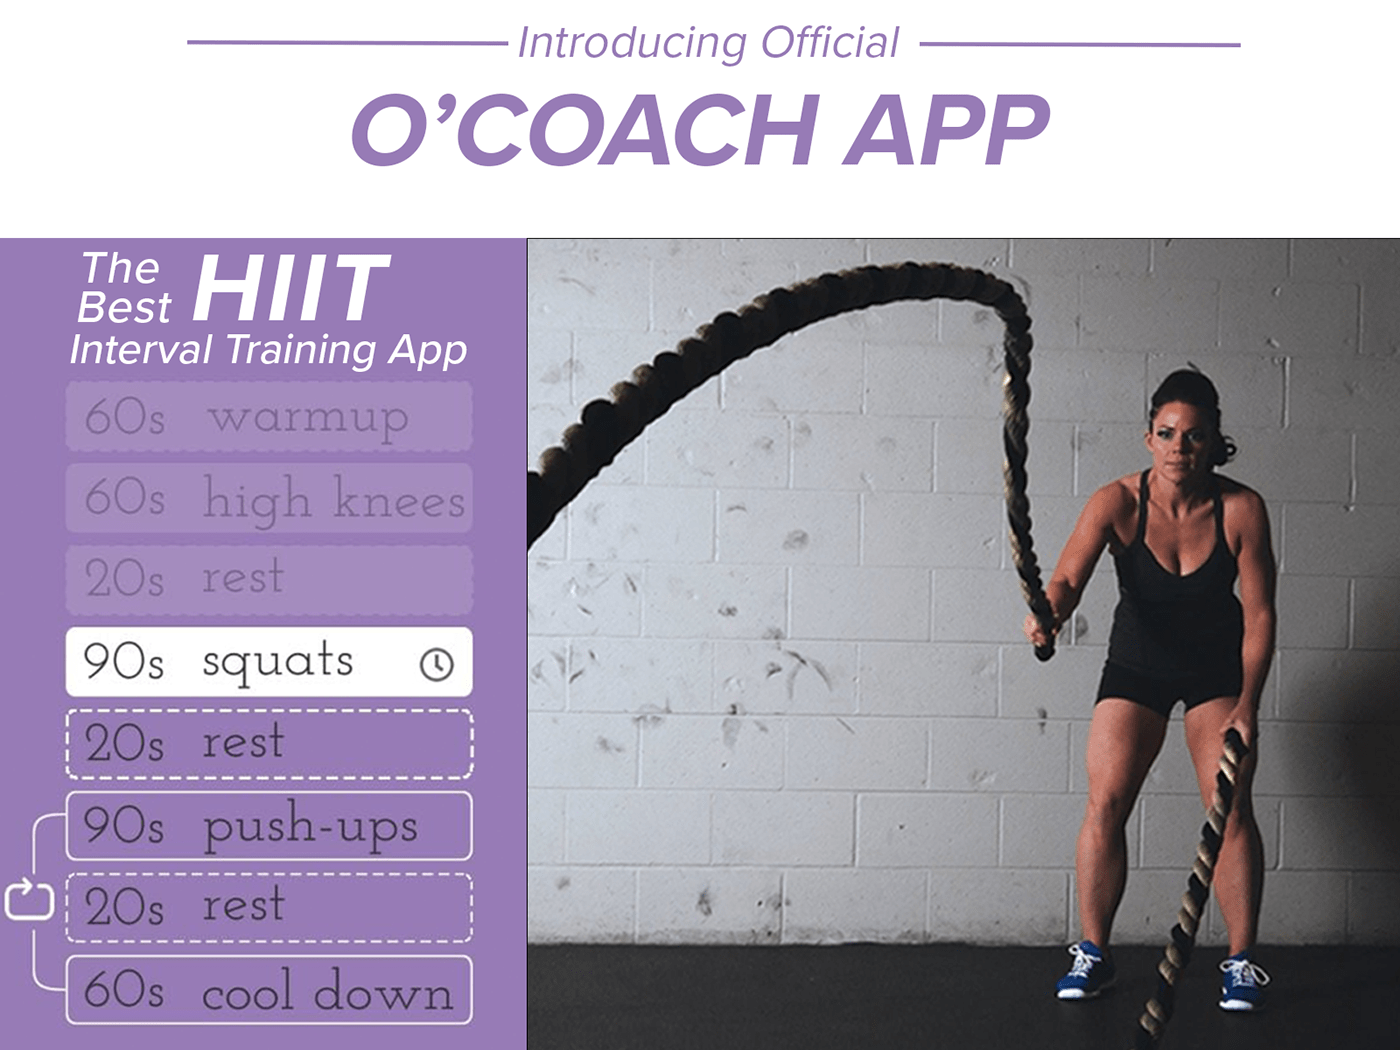 Get healthy by planing and executing efficient workouts with the help of O'Coach app.